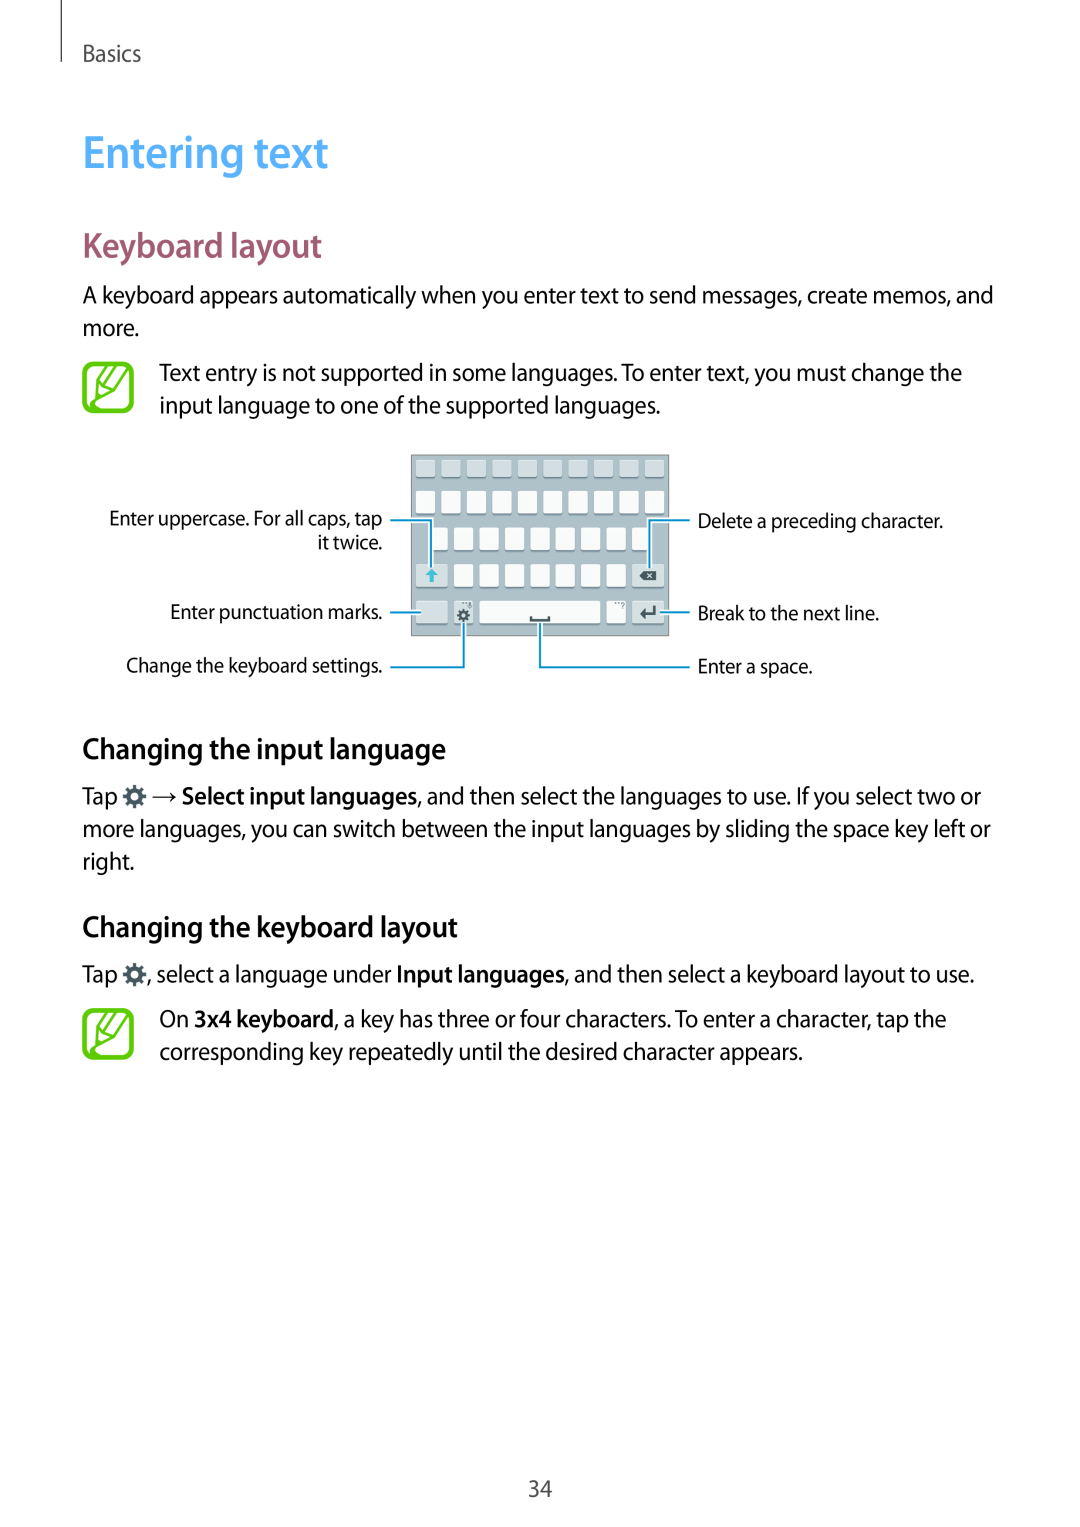 Samsung SM-A700FZKAXEH Entering text, Keyboard layout, Changing the input language, Changing the keyboard layout, Basics 